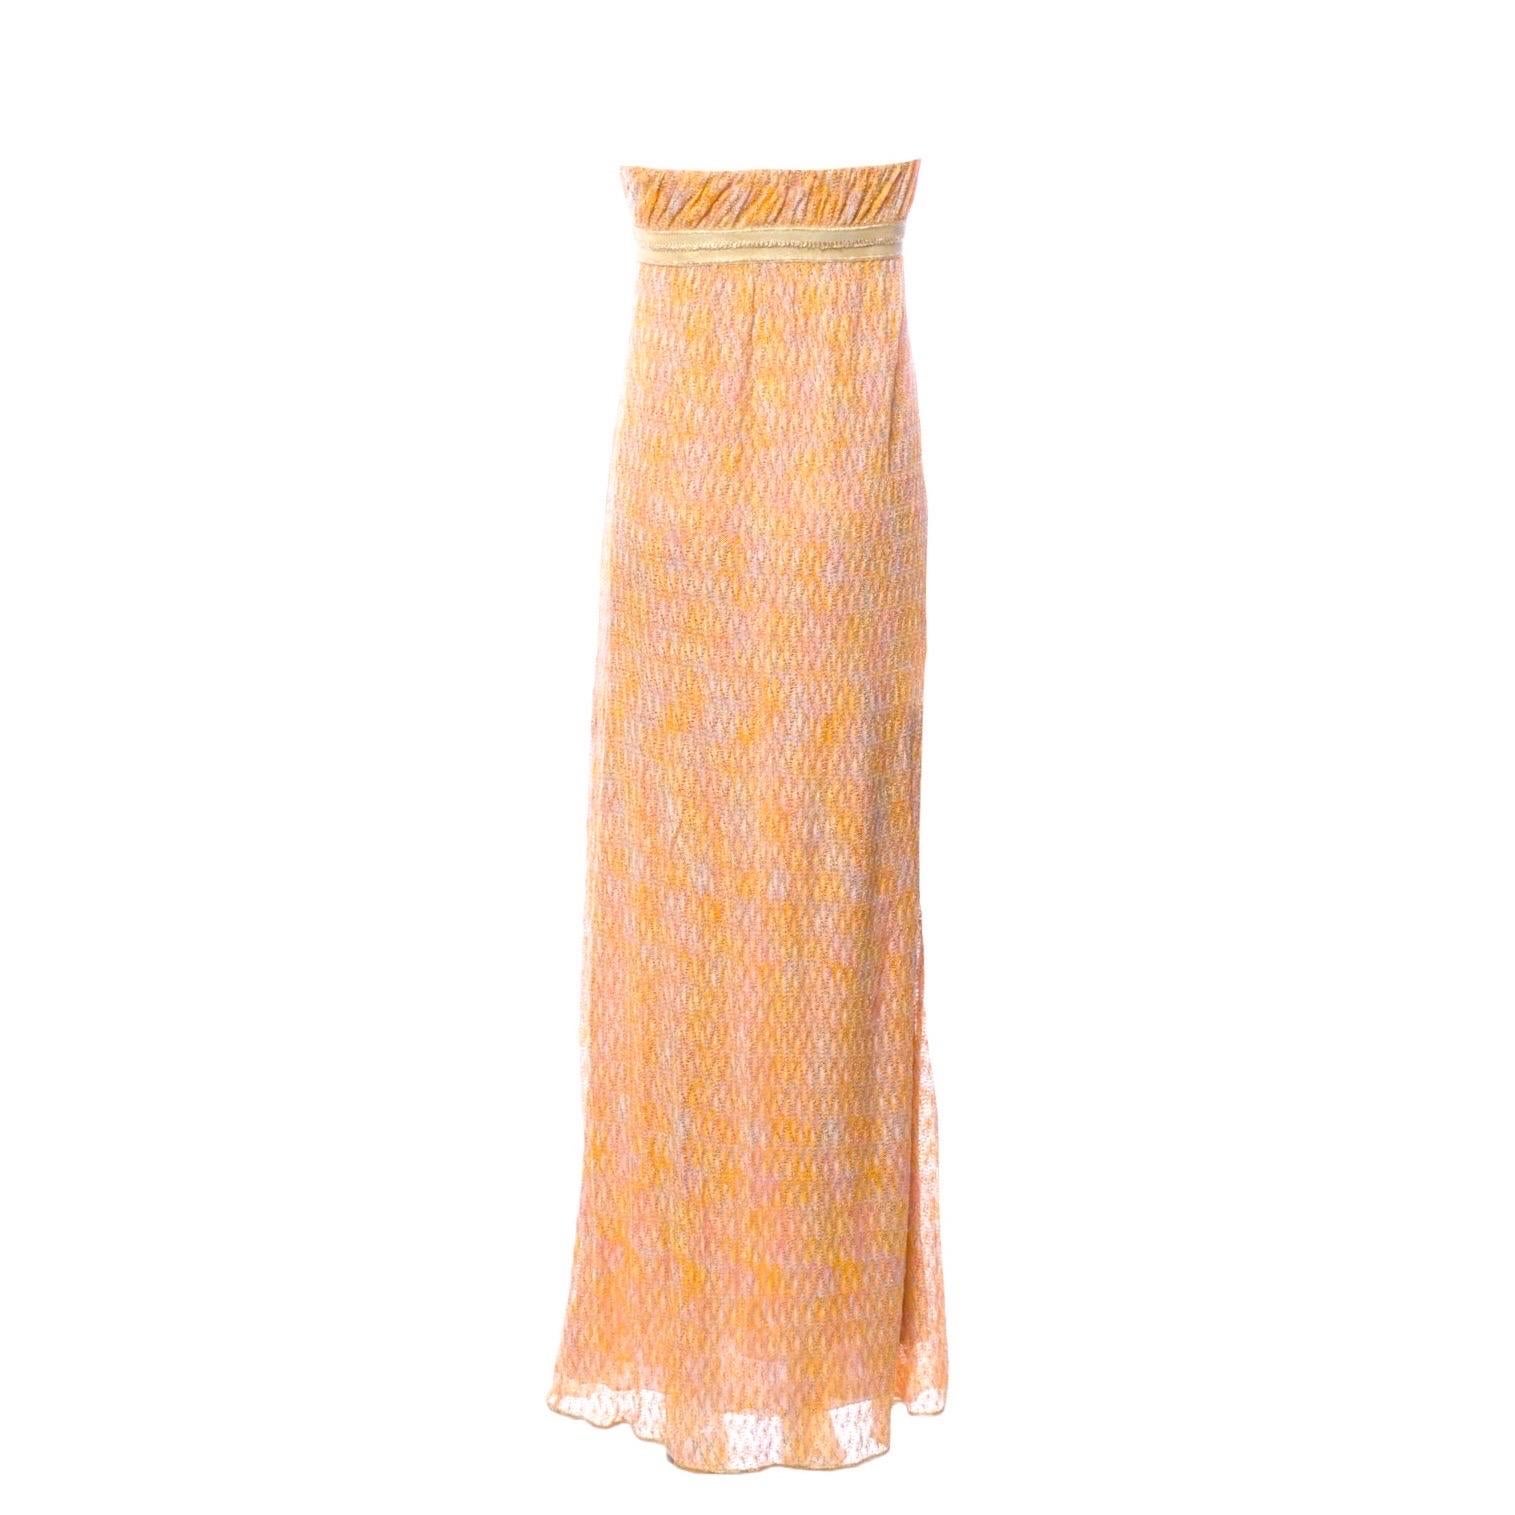 A fantastic Missoni Crochet Knit Evening Gown
A classy, timeless piece
Corset-style top
Boned bustier-top inside for a perfect fit
Strapless empire style
Beautiful golden metallic crochet knit fabric with golden lurex thread
Fully lined with